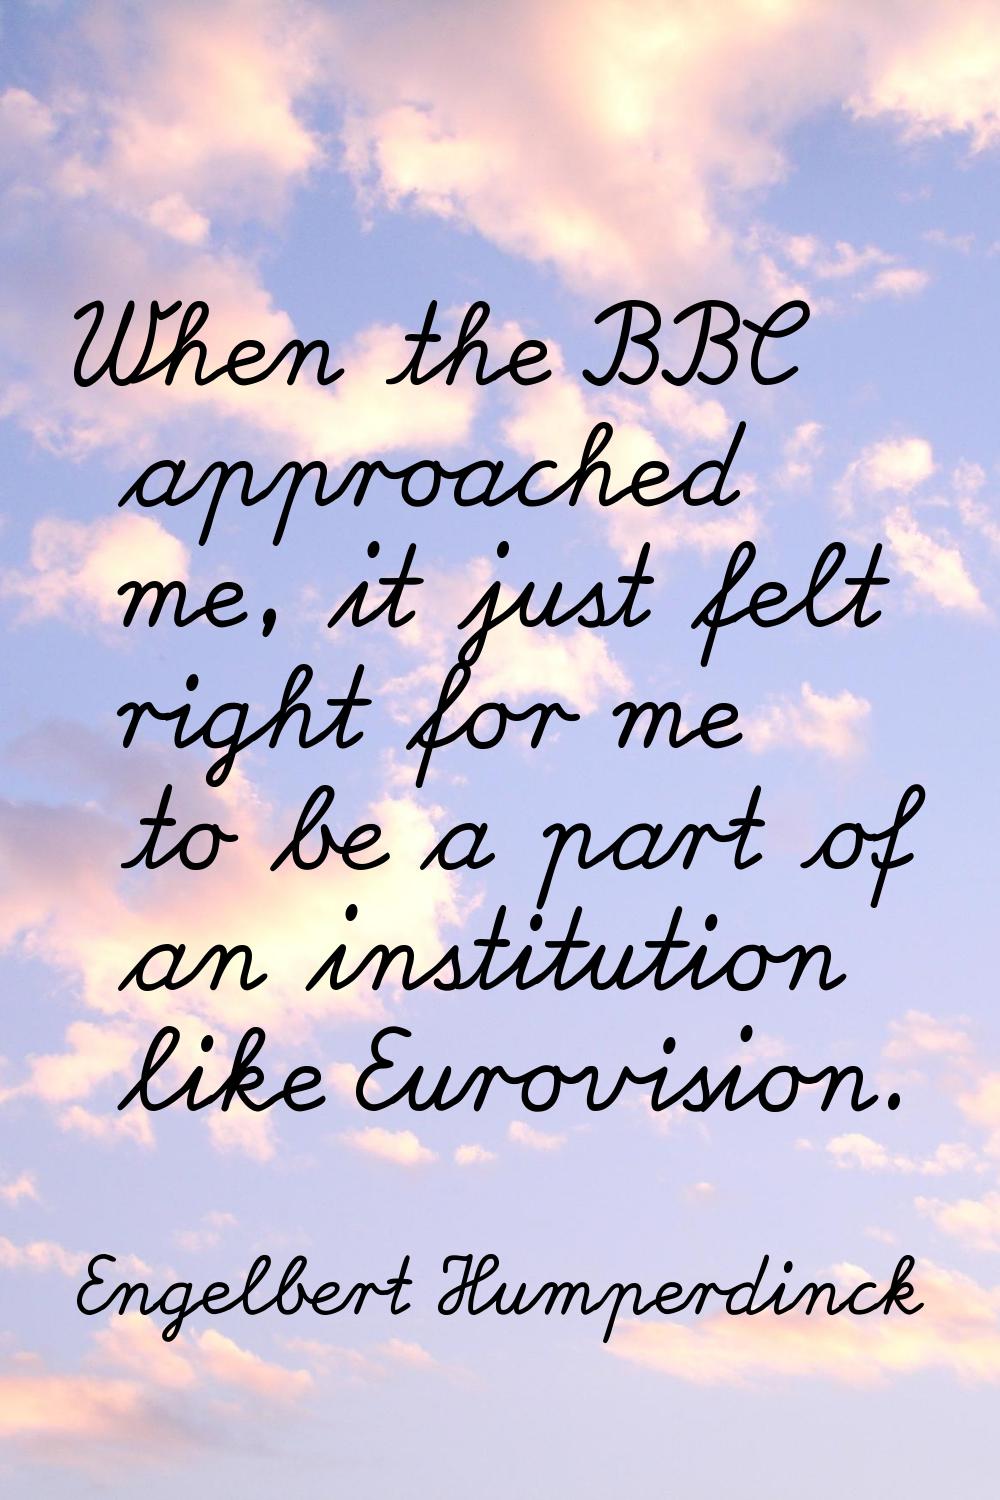 When the BBC approached me, it just felt right for me to be a part of an institution like Eurovisio